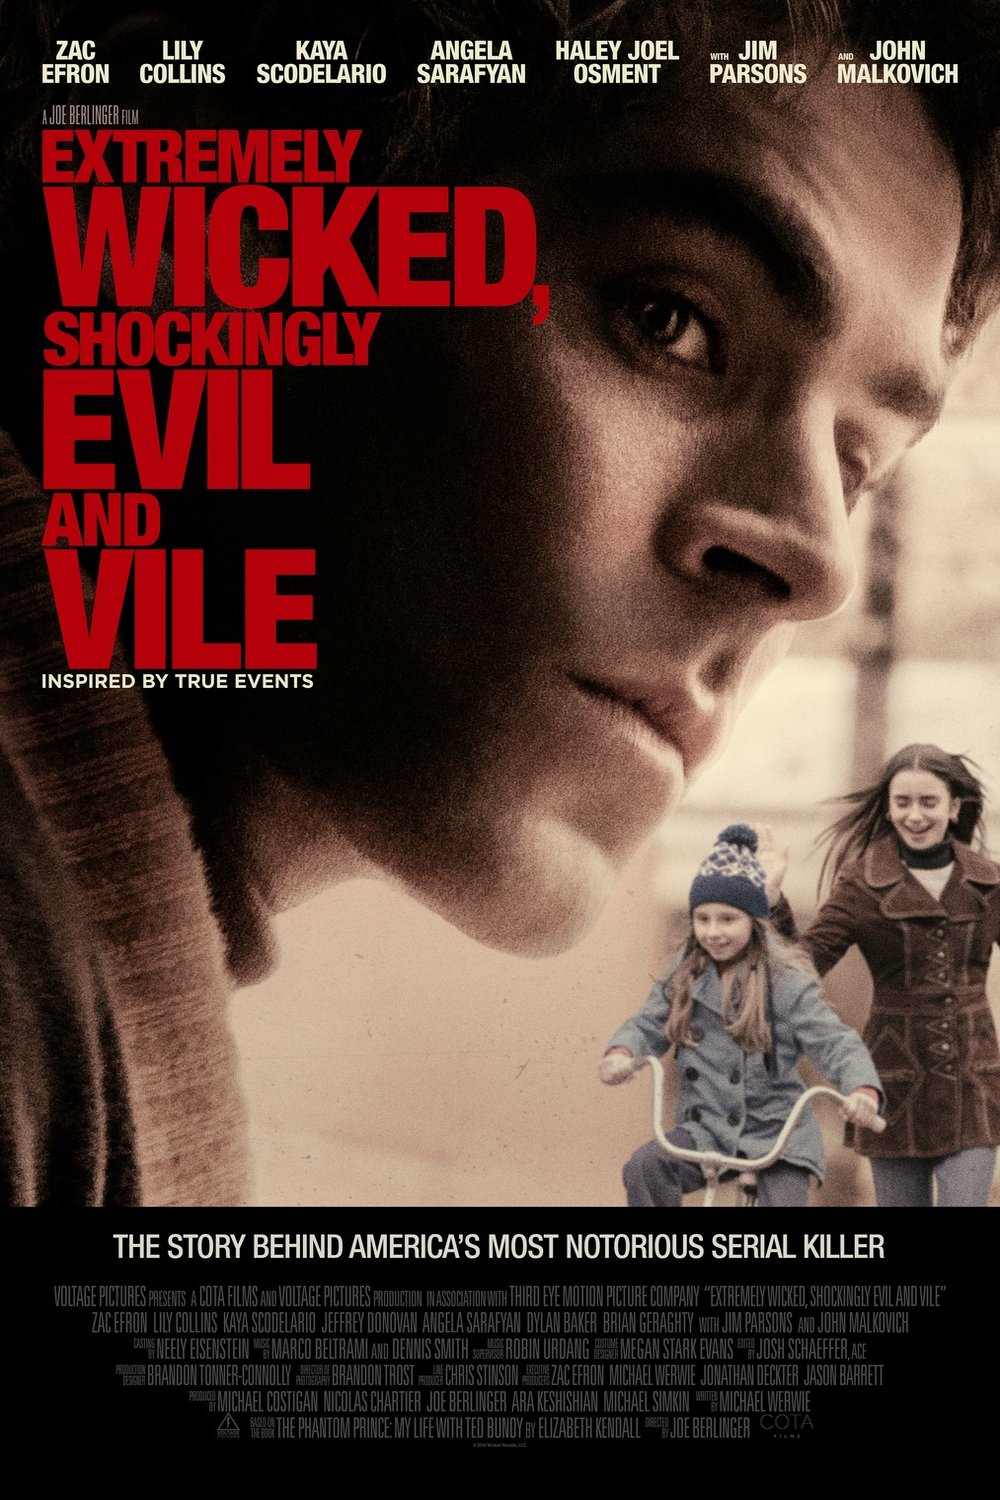 L'affiche du film Extremely Wicked, Shockingly Evil and Vile